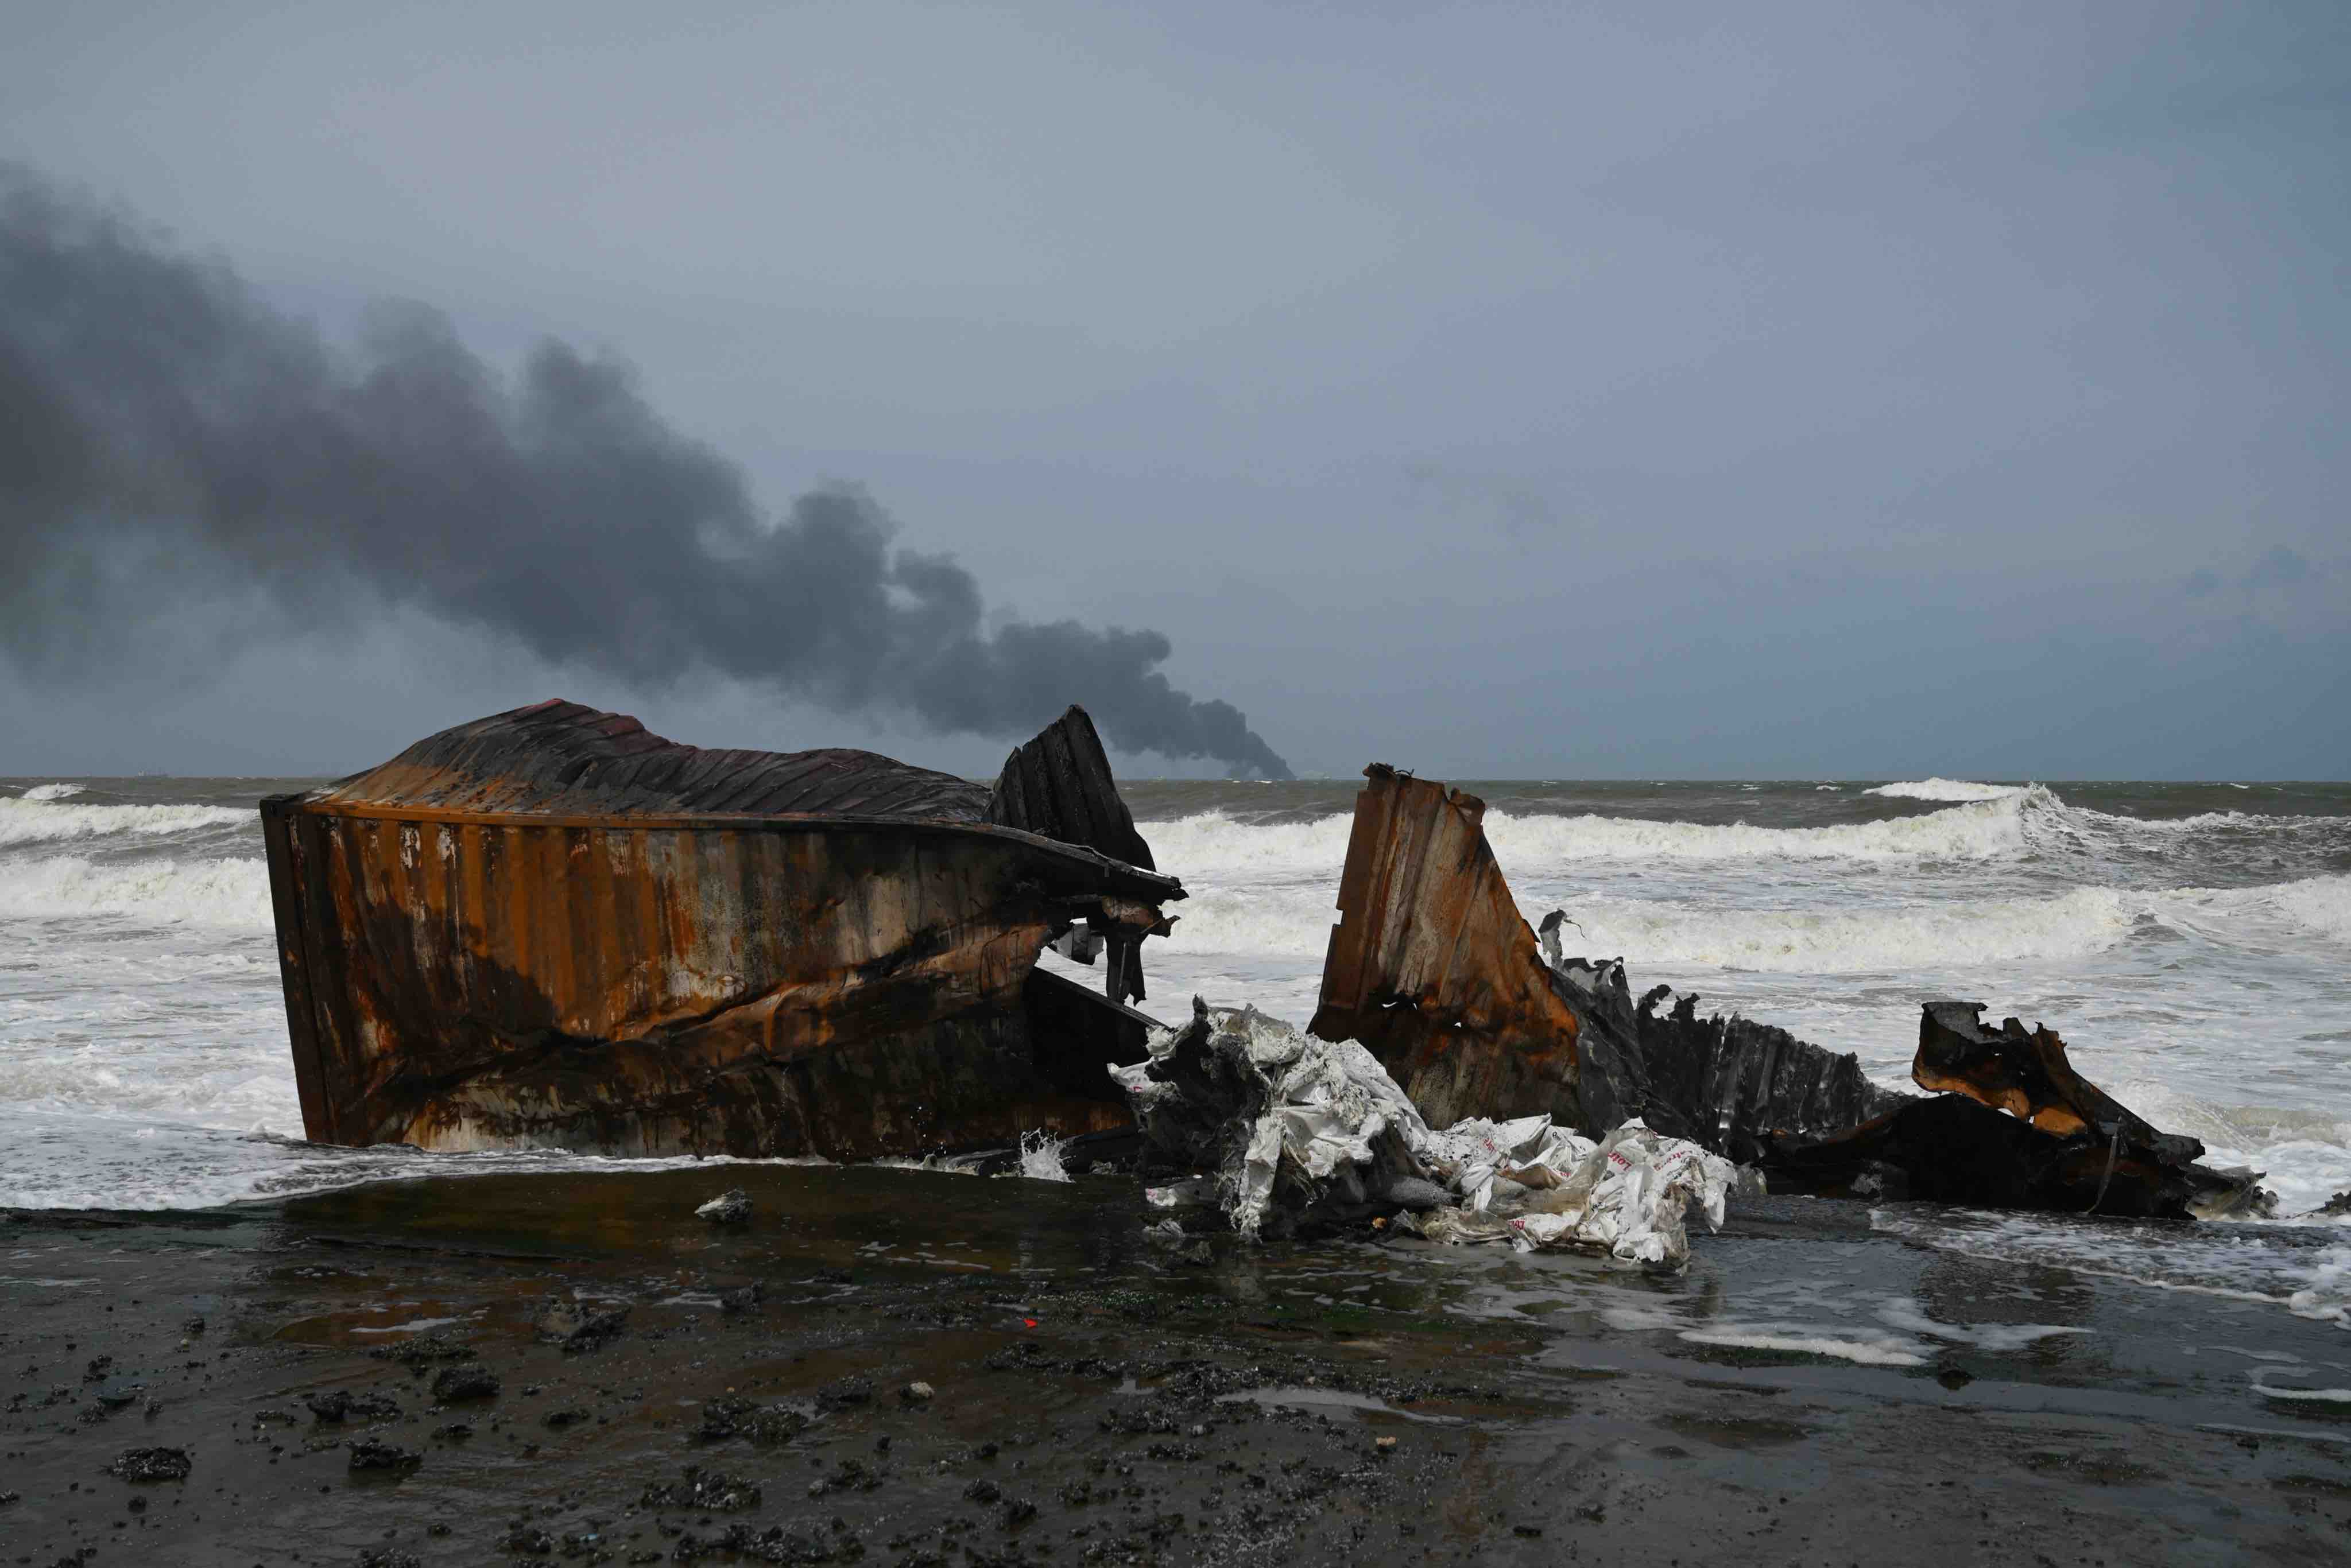 A Cargo Ship Has Been Burning For Days Off Sri Lanka’s Coast, Causing A Massive Environmental Disaster